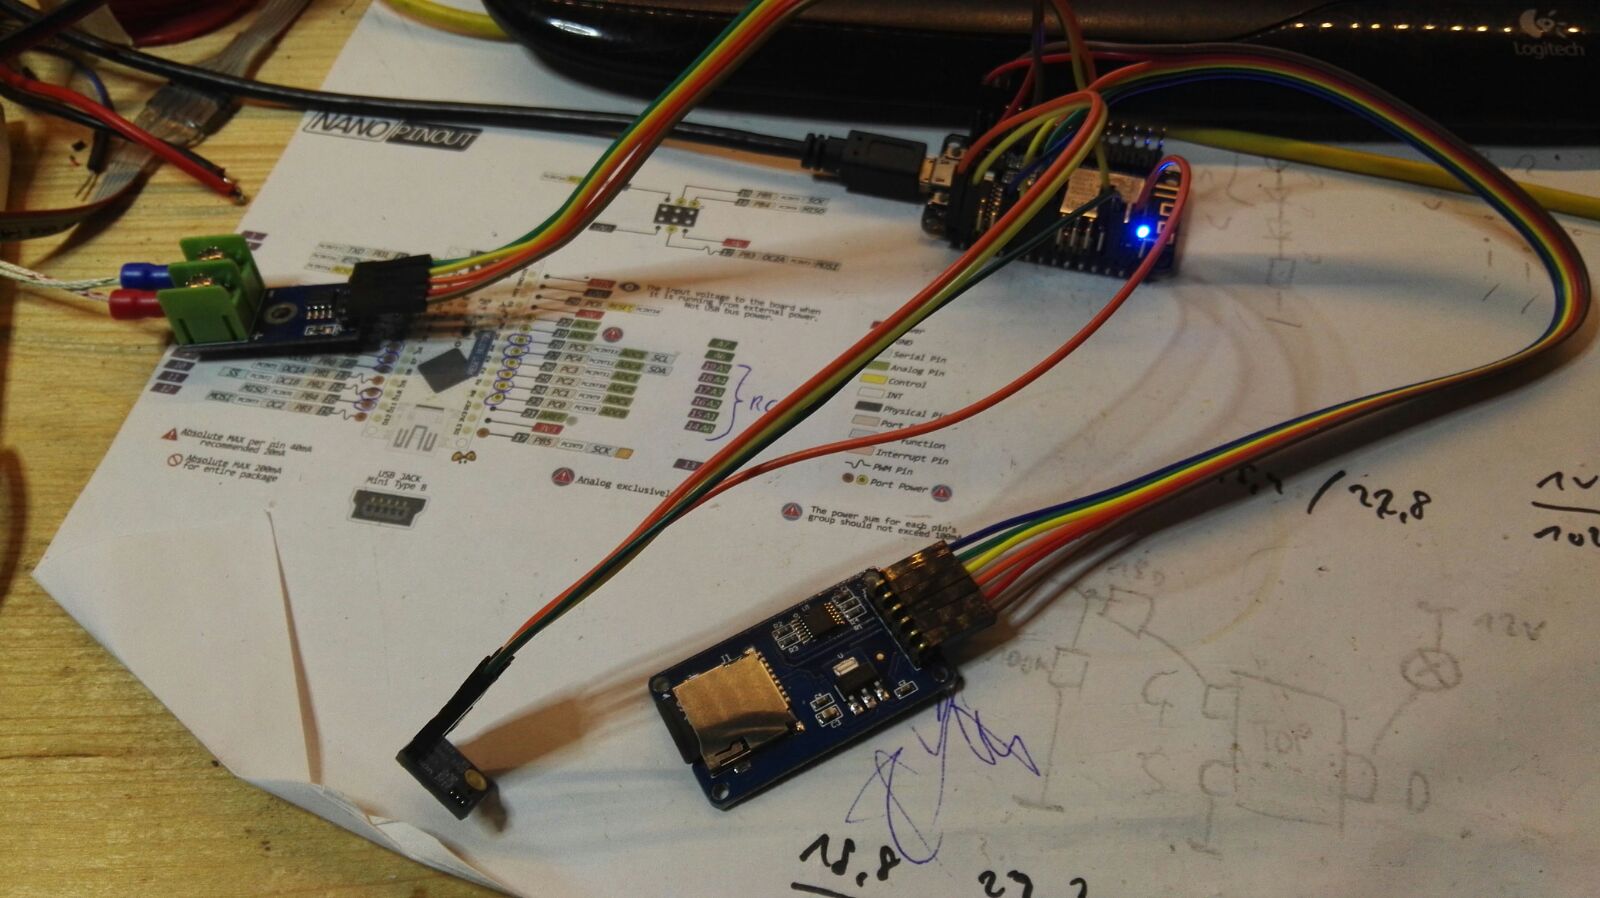 I used a Thermocouple via SPI, SI7021 I2C Sensor and the SD Card and there are still pins left :-D